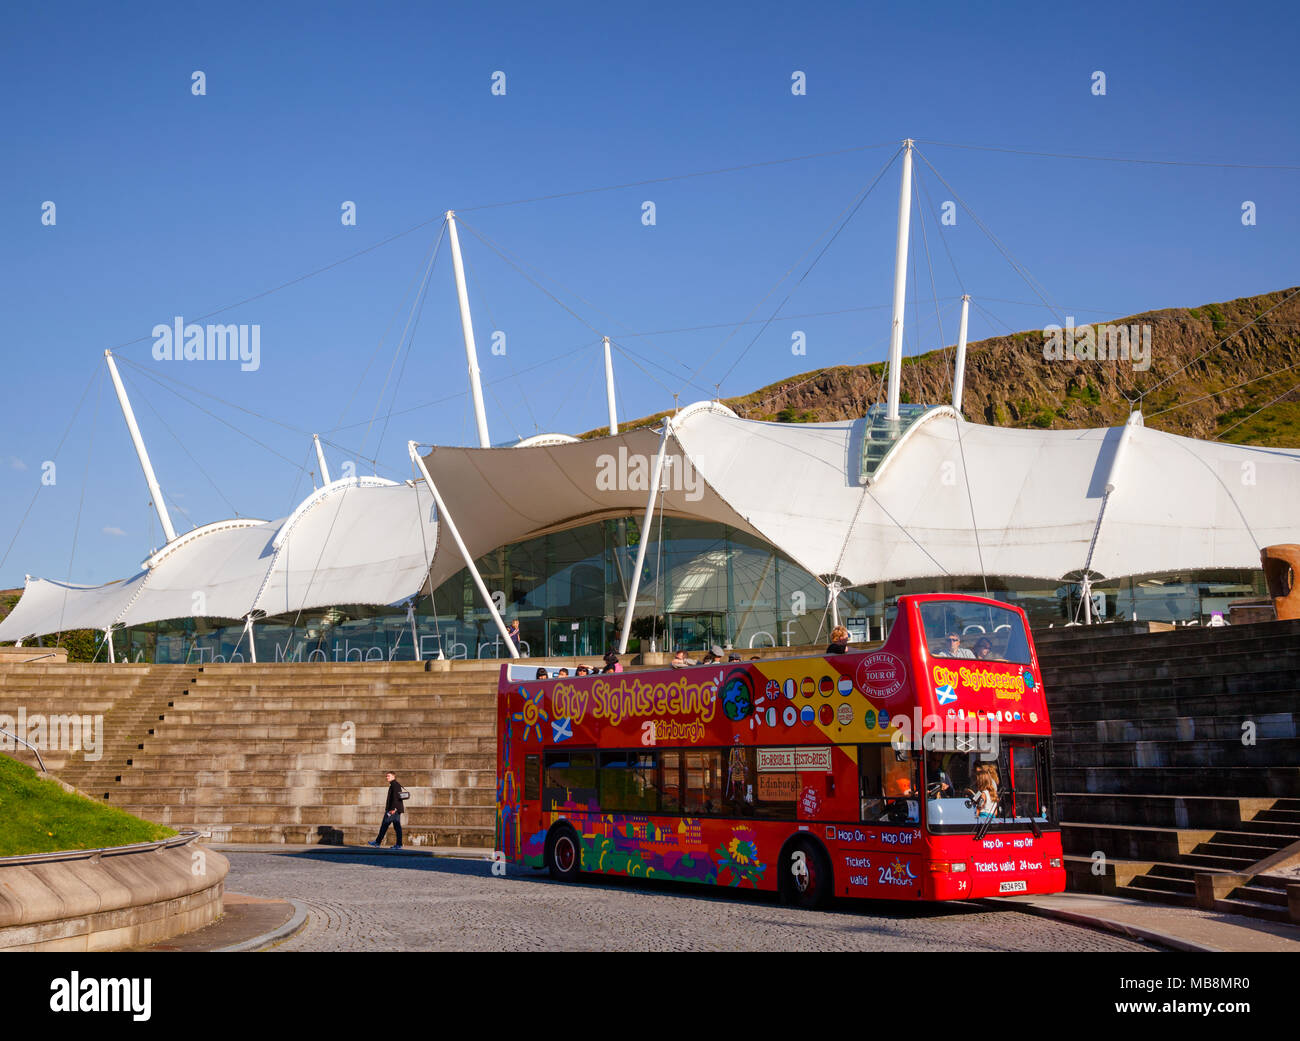 EDINBURGH, UK - AUG 8, 2012: Touristic red double-decker hop-on hop-off City Sightseeing tour bus at the Dynamic Earth, a popular science attraction a Stock Photo